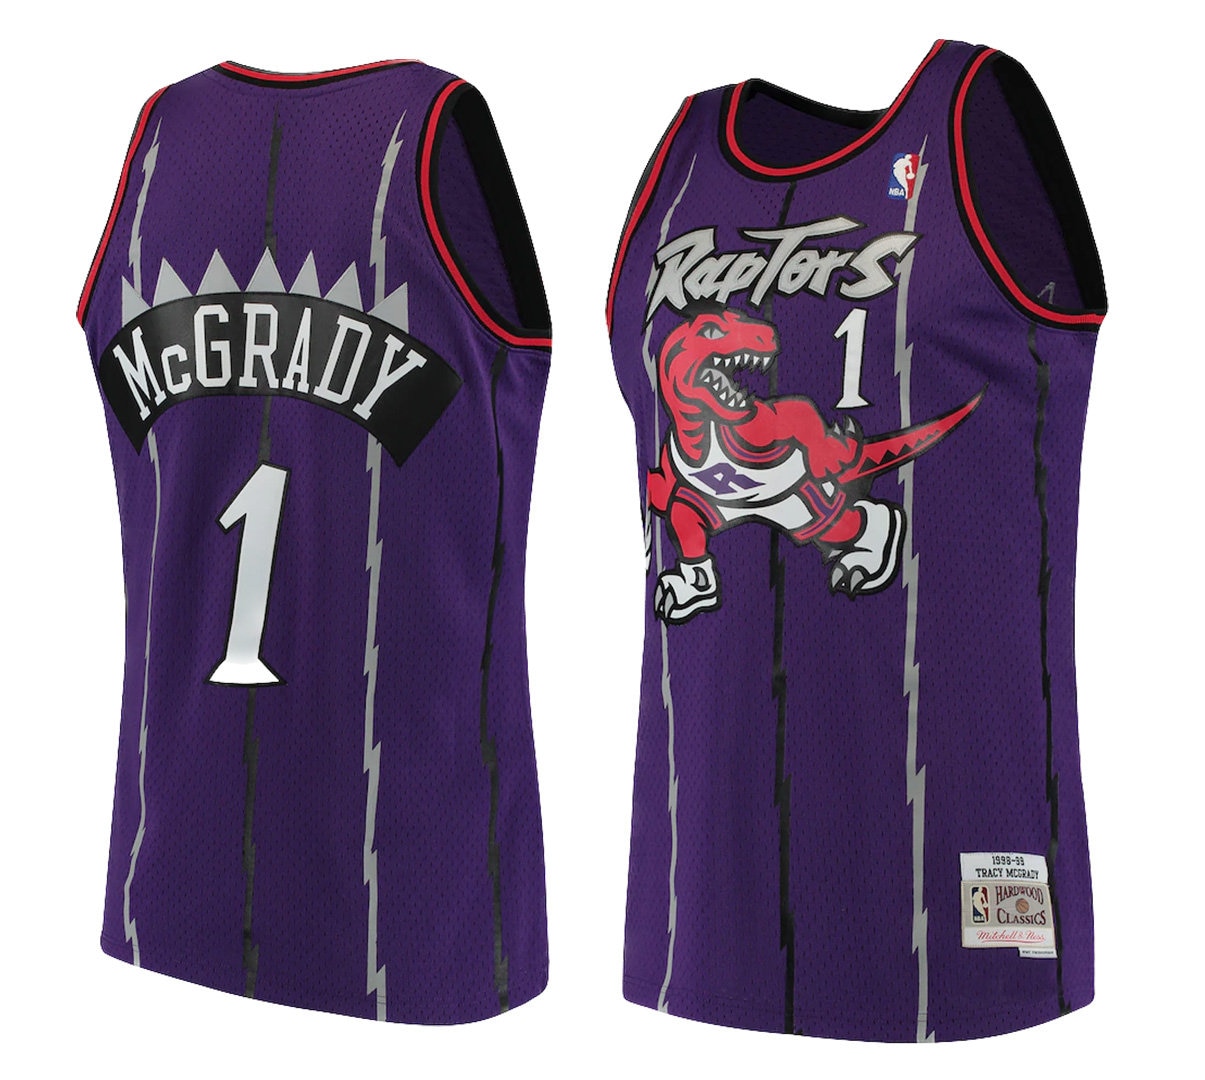 NBA Tracy McGrady 2004 All-Star Authentic Jersey By Mitchell & Ness - Blue  - Mens